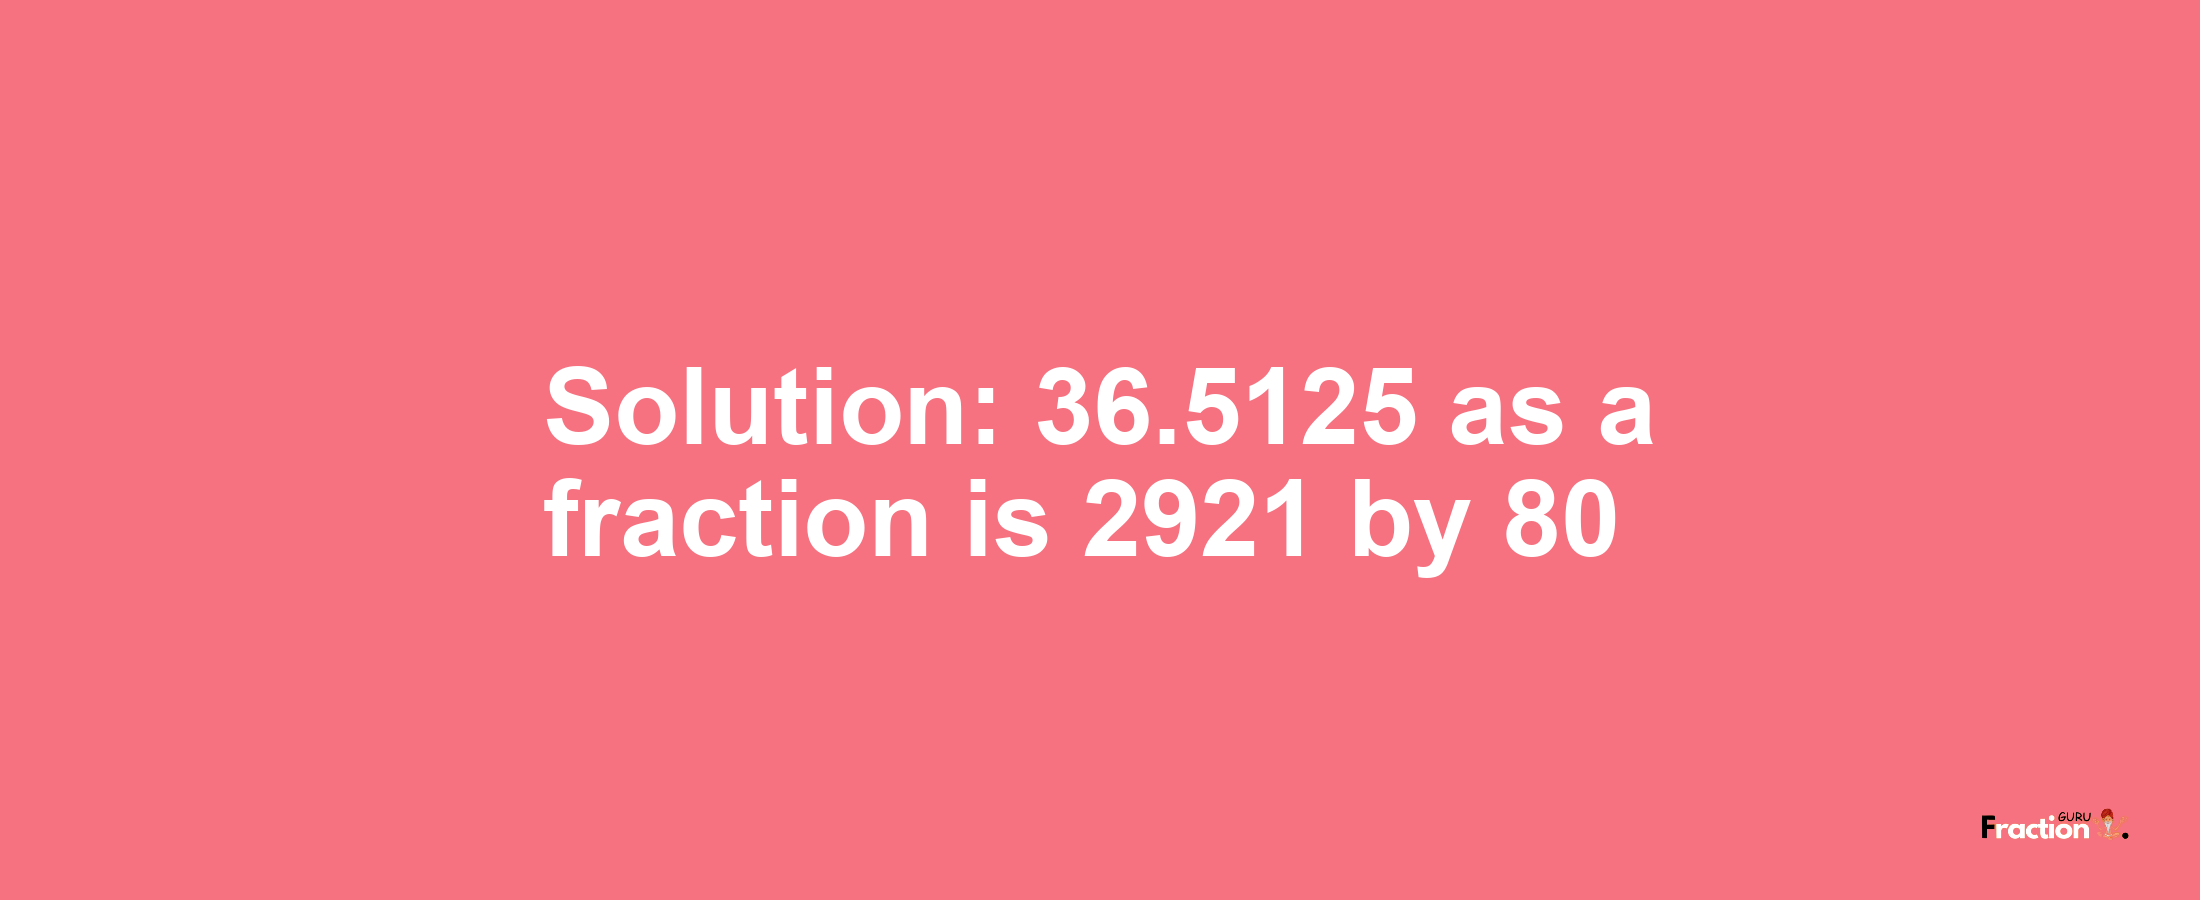 Solution:36.5125 as a fraction is 2921/80